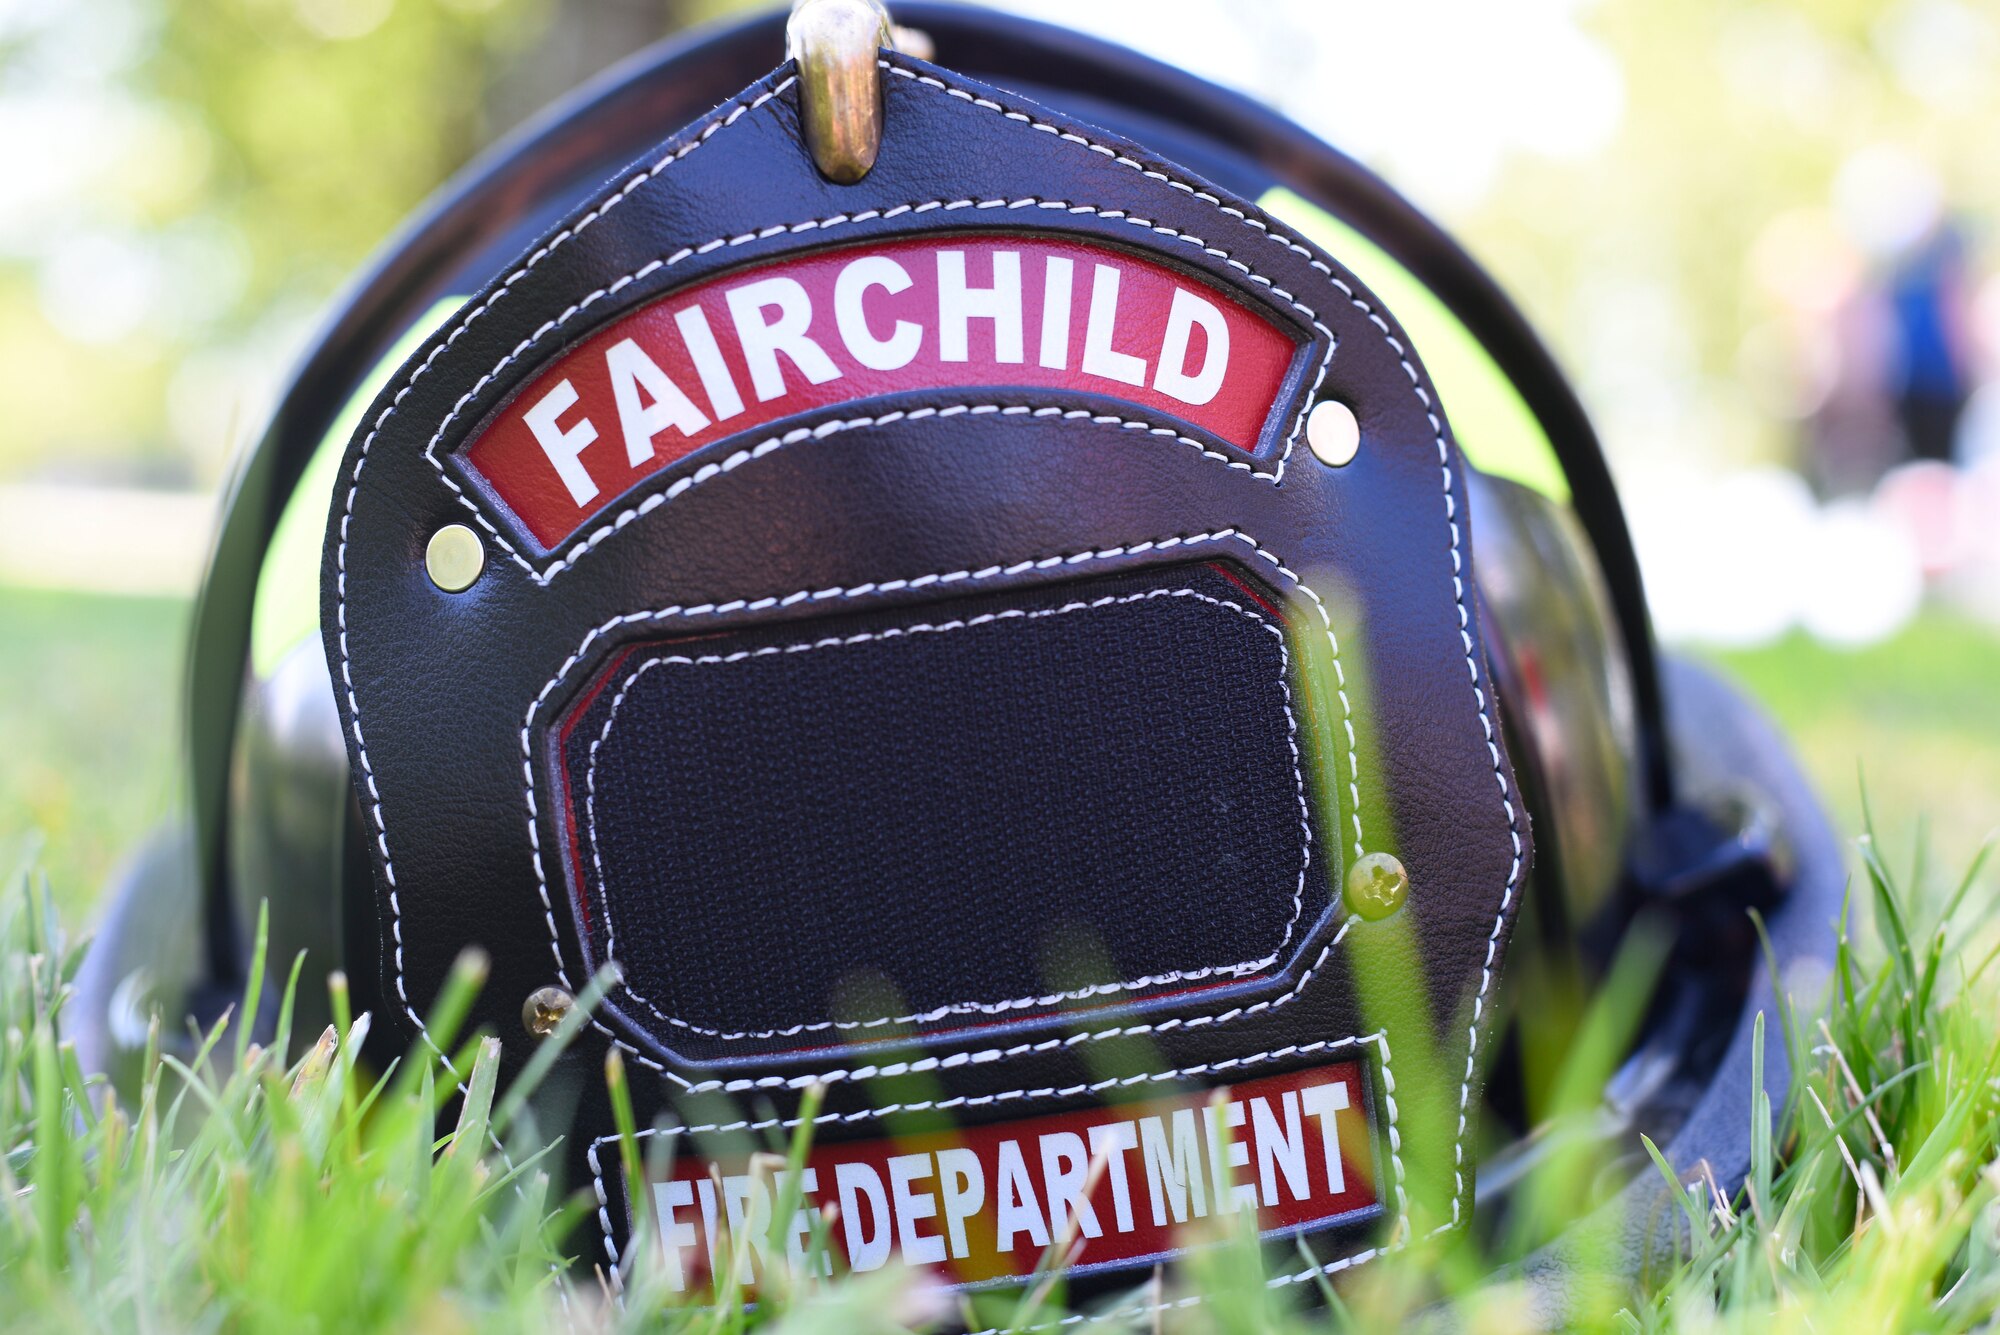 A firefighter’s helmet from Fairchild’s fire department rests in the grass during the Summer Youth Fair at Fairchild Air Force Base, Washington, July 25, 2019. Members from Fairchild’s 92nd Civil Engineer Squadron Fire Department, Explosive Ordnance Disposal team, 92nd Security Forces Squadron and 92nd Medical Group provided activities and educational exhibits. (U.S. Air Force photo by Airman 1st Class Lawrence Sena)